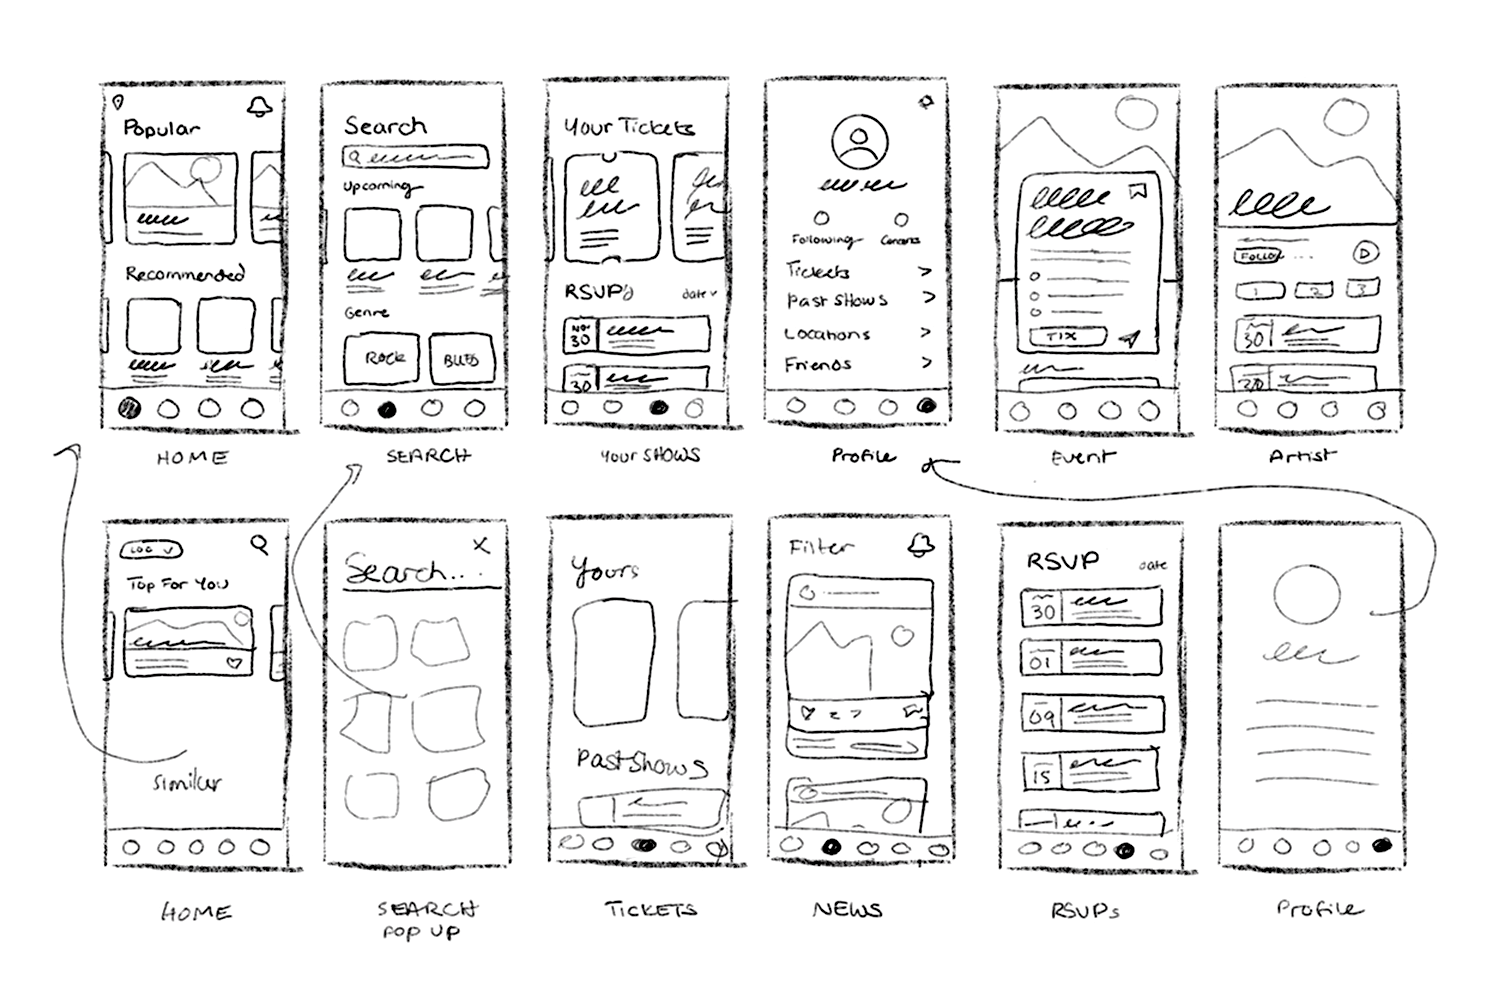 Hand-drawn sketches of a mobile app wireframe for concert browsing, featuring screens for search, tickets, and user profiles.